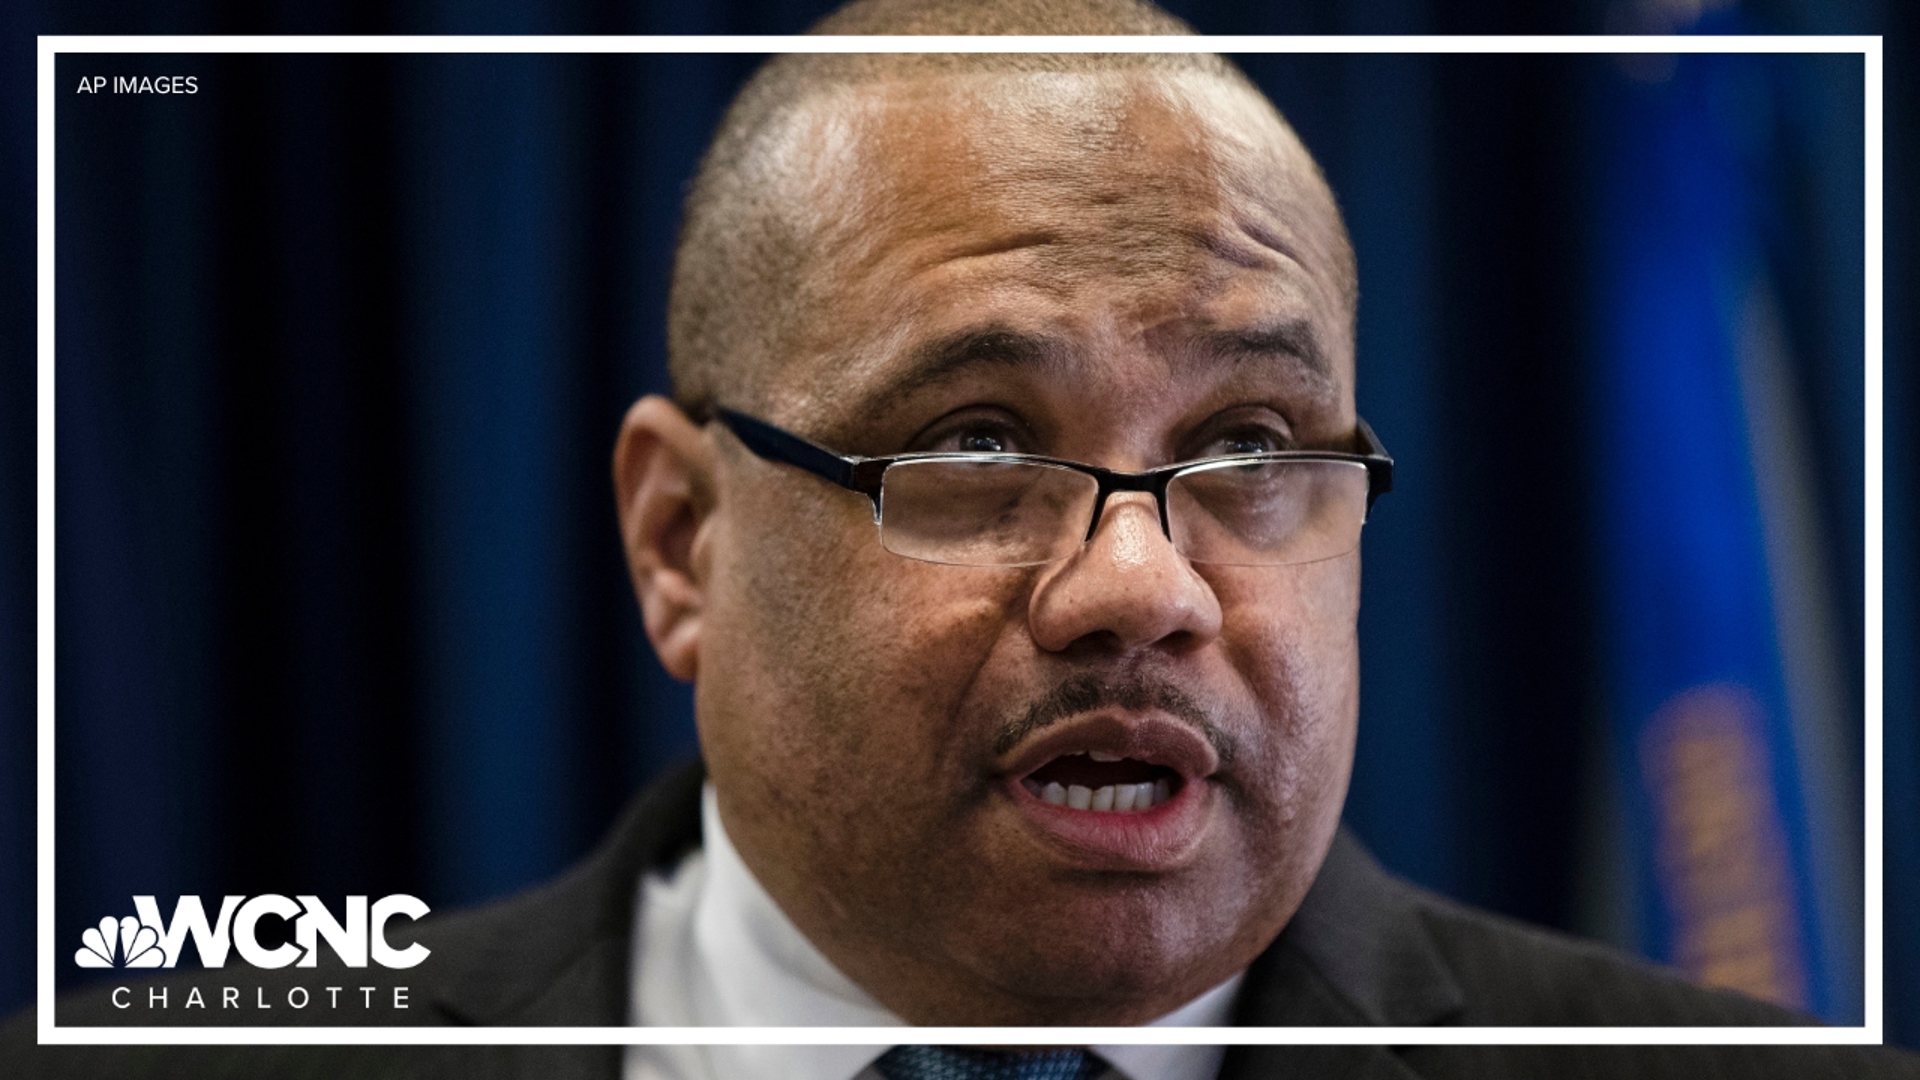 "Our work is exceedingly dangerous," Ronald Davis, the director of the U.S. Marshals Service, said before a House Judiciary subcommittee in mid-February.